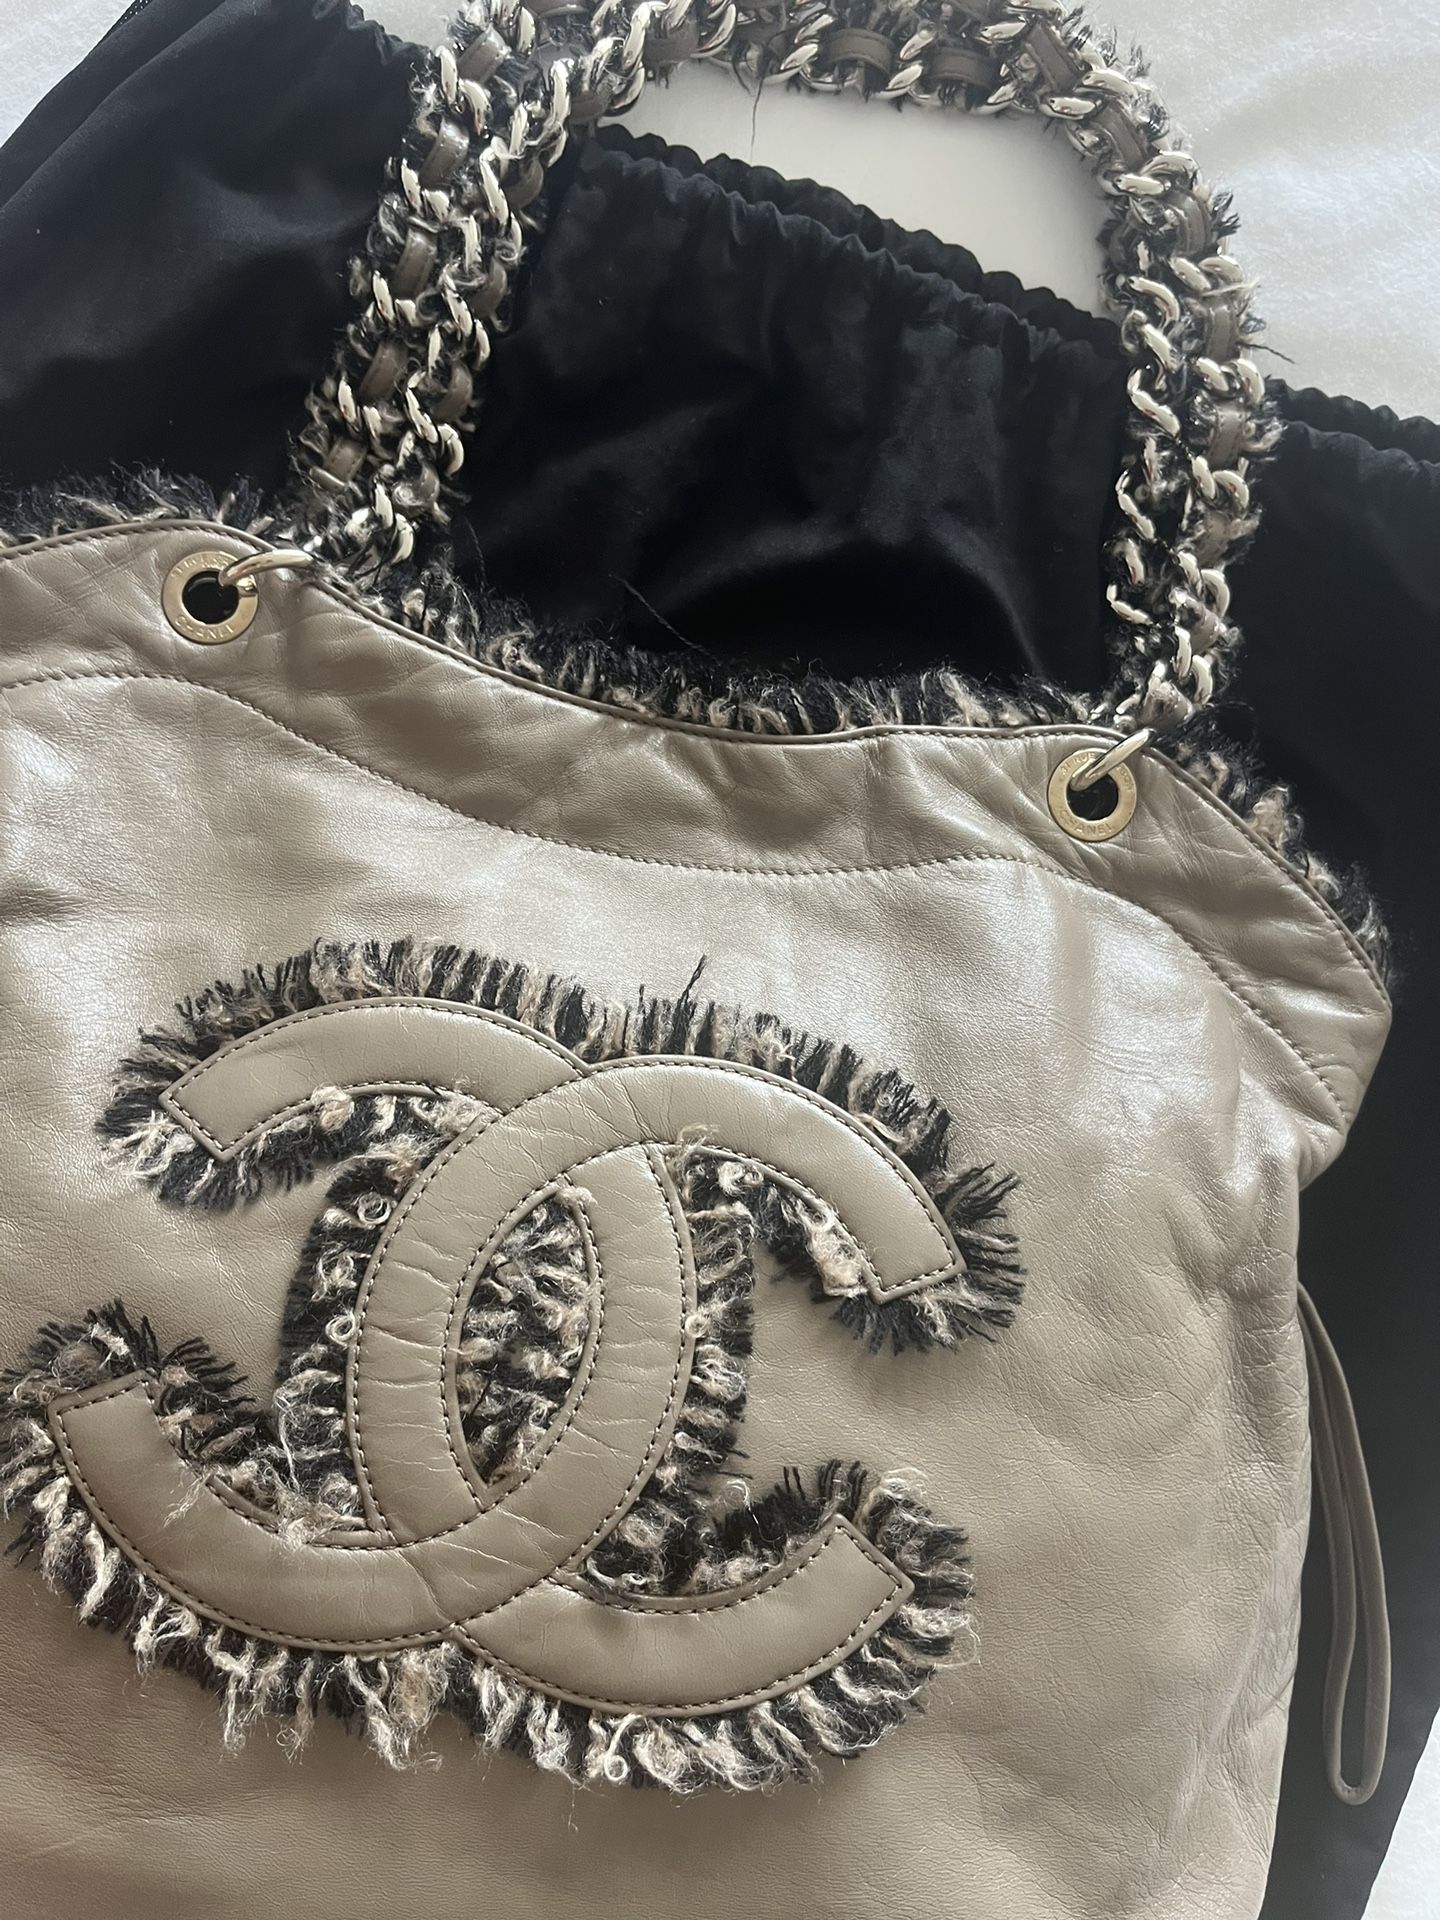 Chanel Tweed & Leather Handbag for Sale in Miami, FL - OfferUp